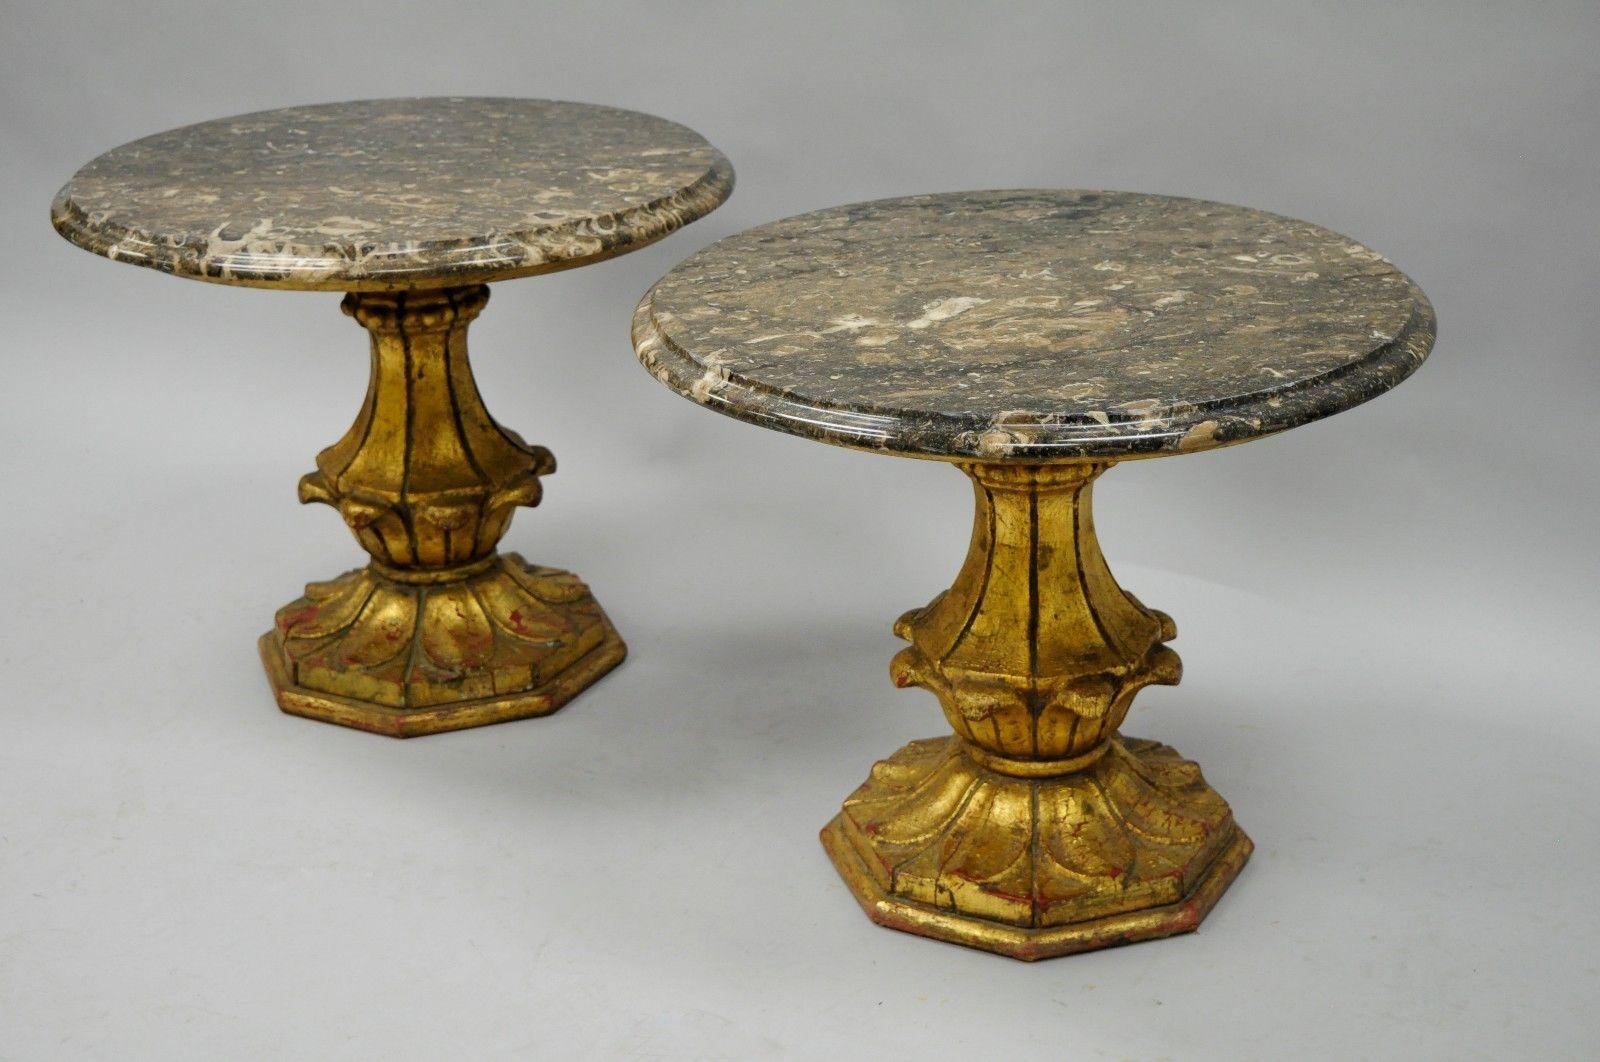 Pair of gold giltwood Hollywood Regency Italian style marble-top low tables by Francisco Hurtado. Item details solid wood pedestal bases, nicely carved details, distressed gold finish, original Francisco Hurtado label, and round marble tops, circa